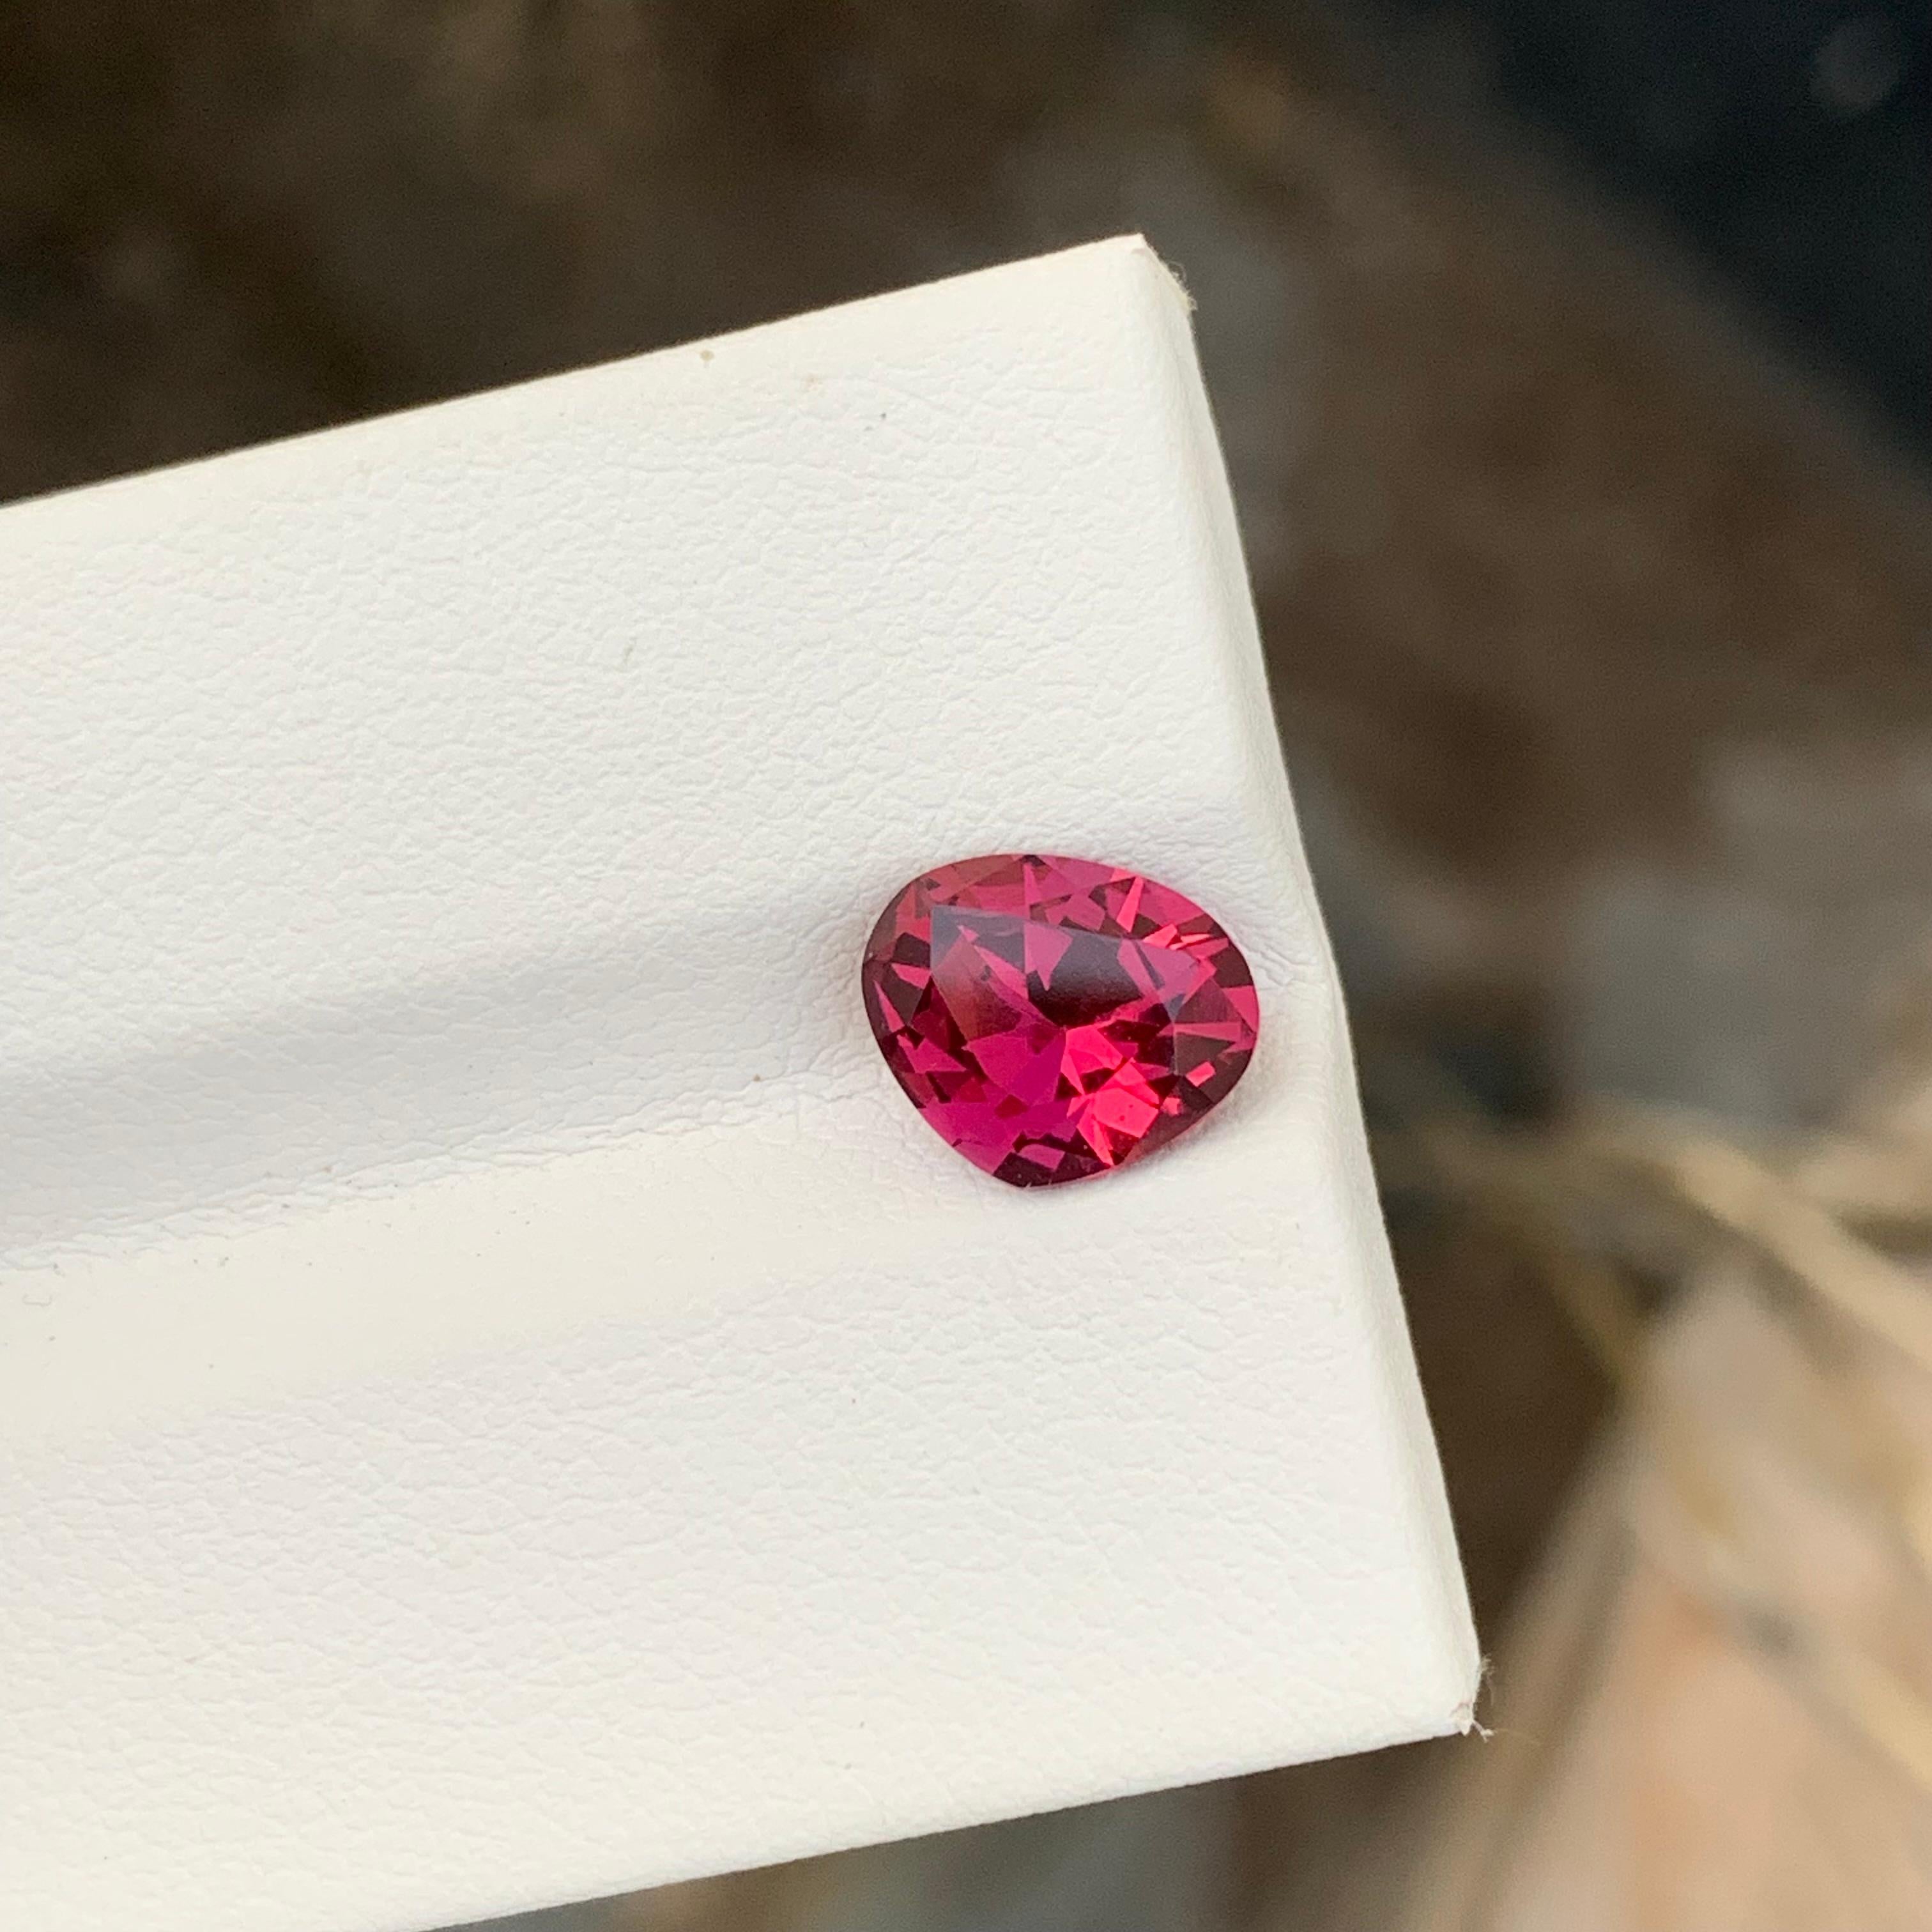 Loose Rhodolite Garnet
Weight: 2.10 Carats
Dimension: 7.4 x 9 x 4.6 Mm
Colour: Red
Origin: Africa
Treatment: Non
Shape : Trillion 

Rhodolite garnet, a gemstone celebrated for its enchanting reddish-purple hues, occupies a special place in the realm